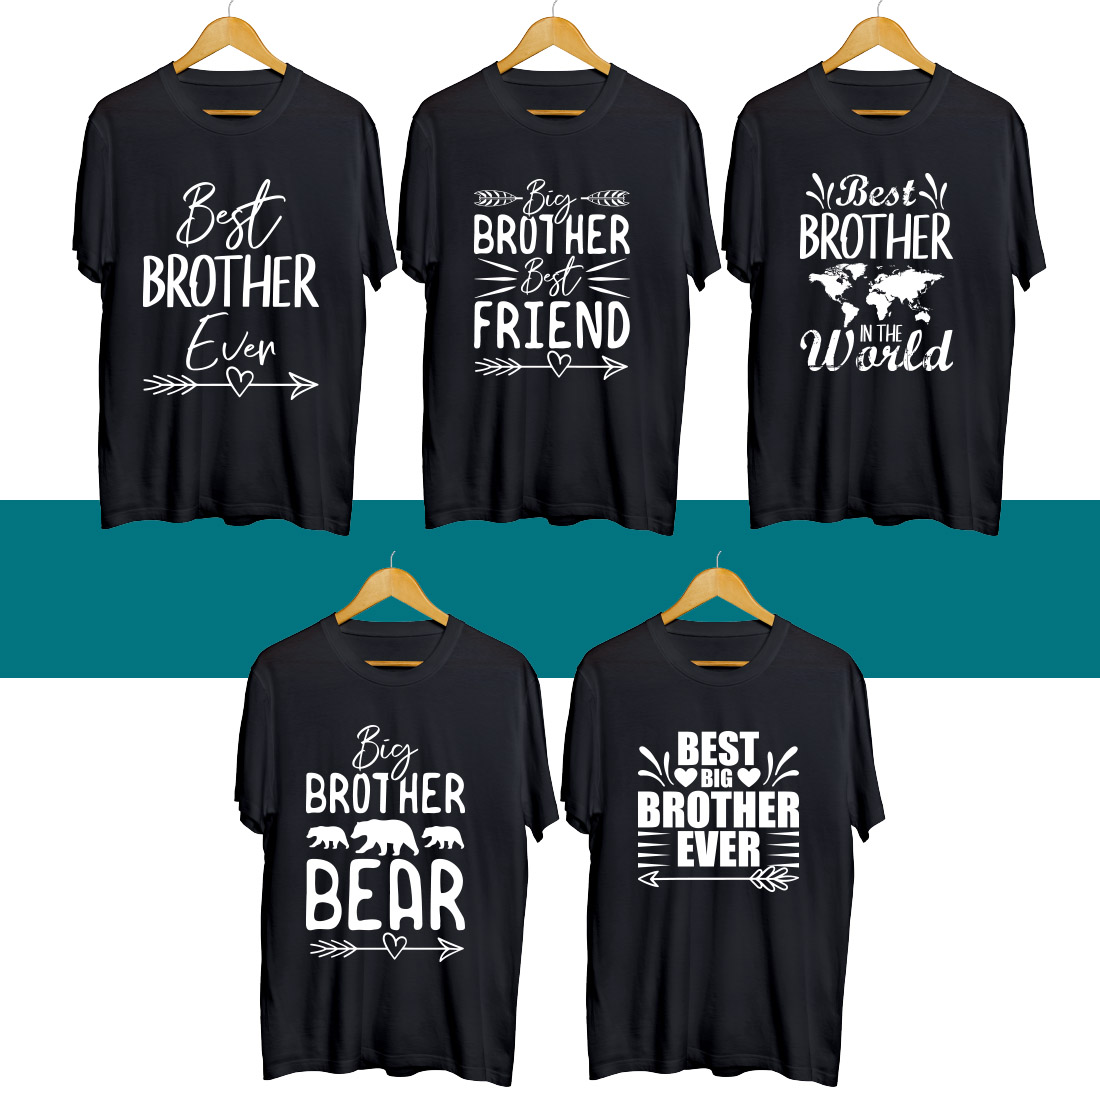 Brother\'s Day SVG T Shirt Designs Bundle cover image.